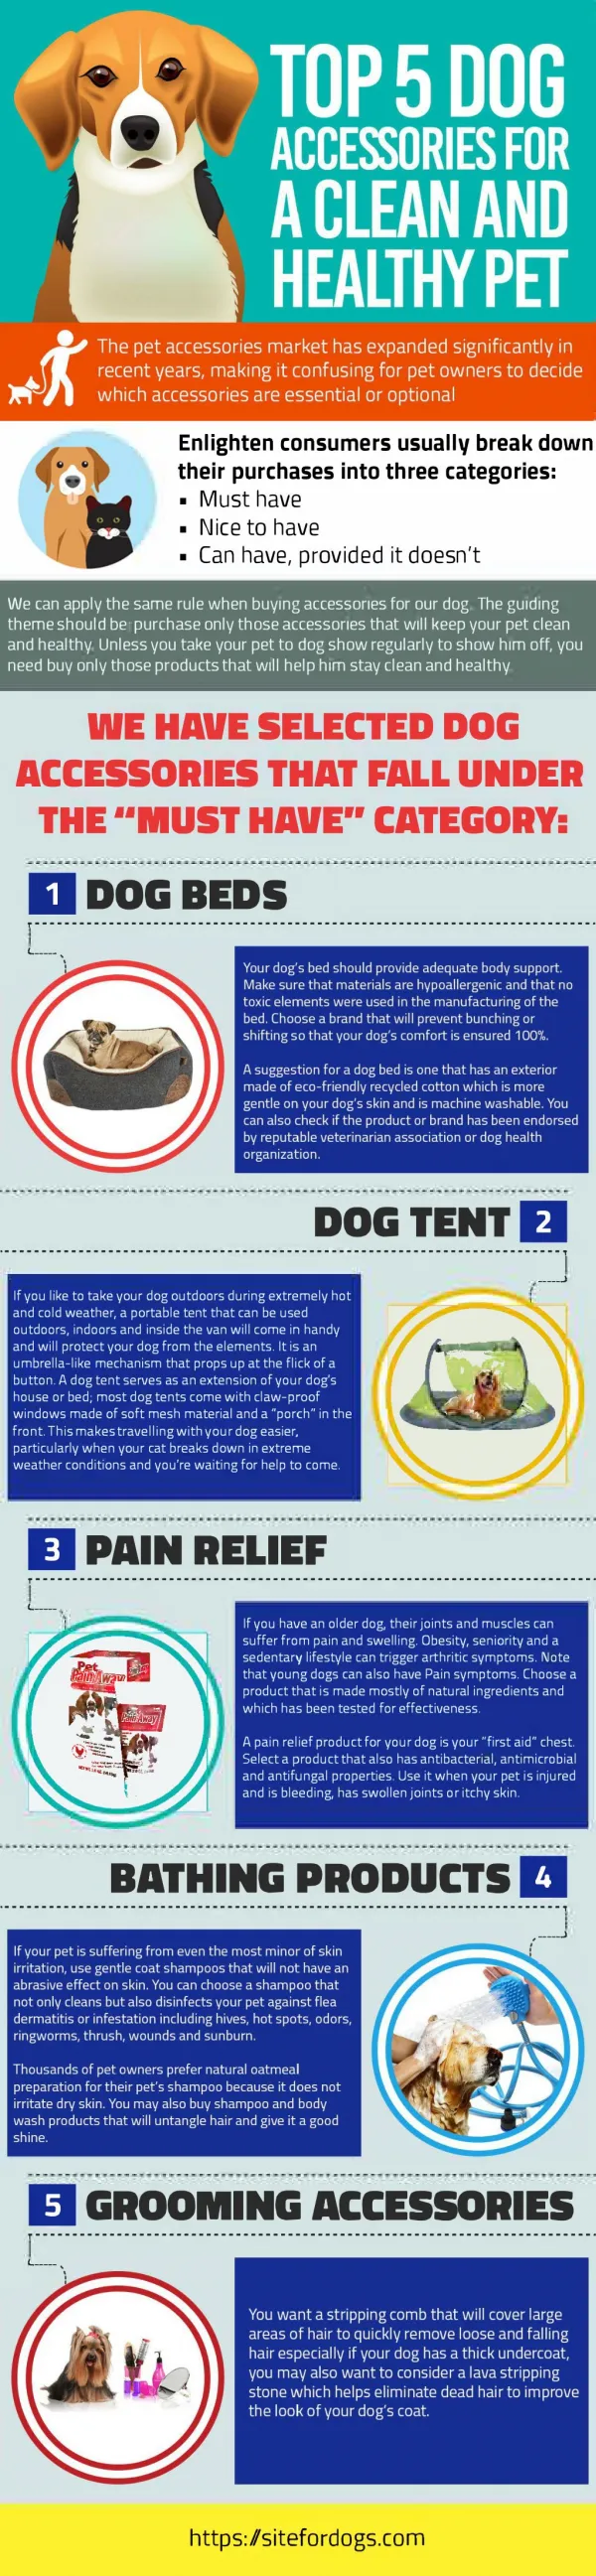 Top 5 Dog Accessories for a Clean and Healthy Pet